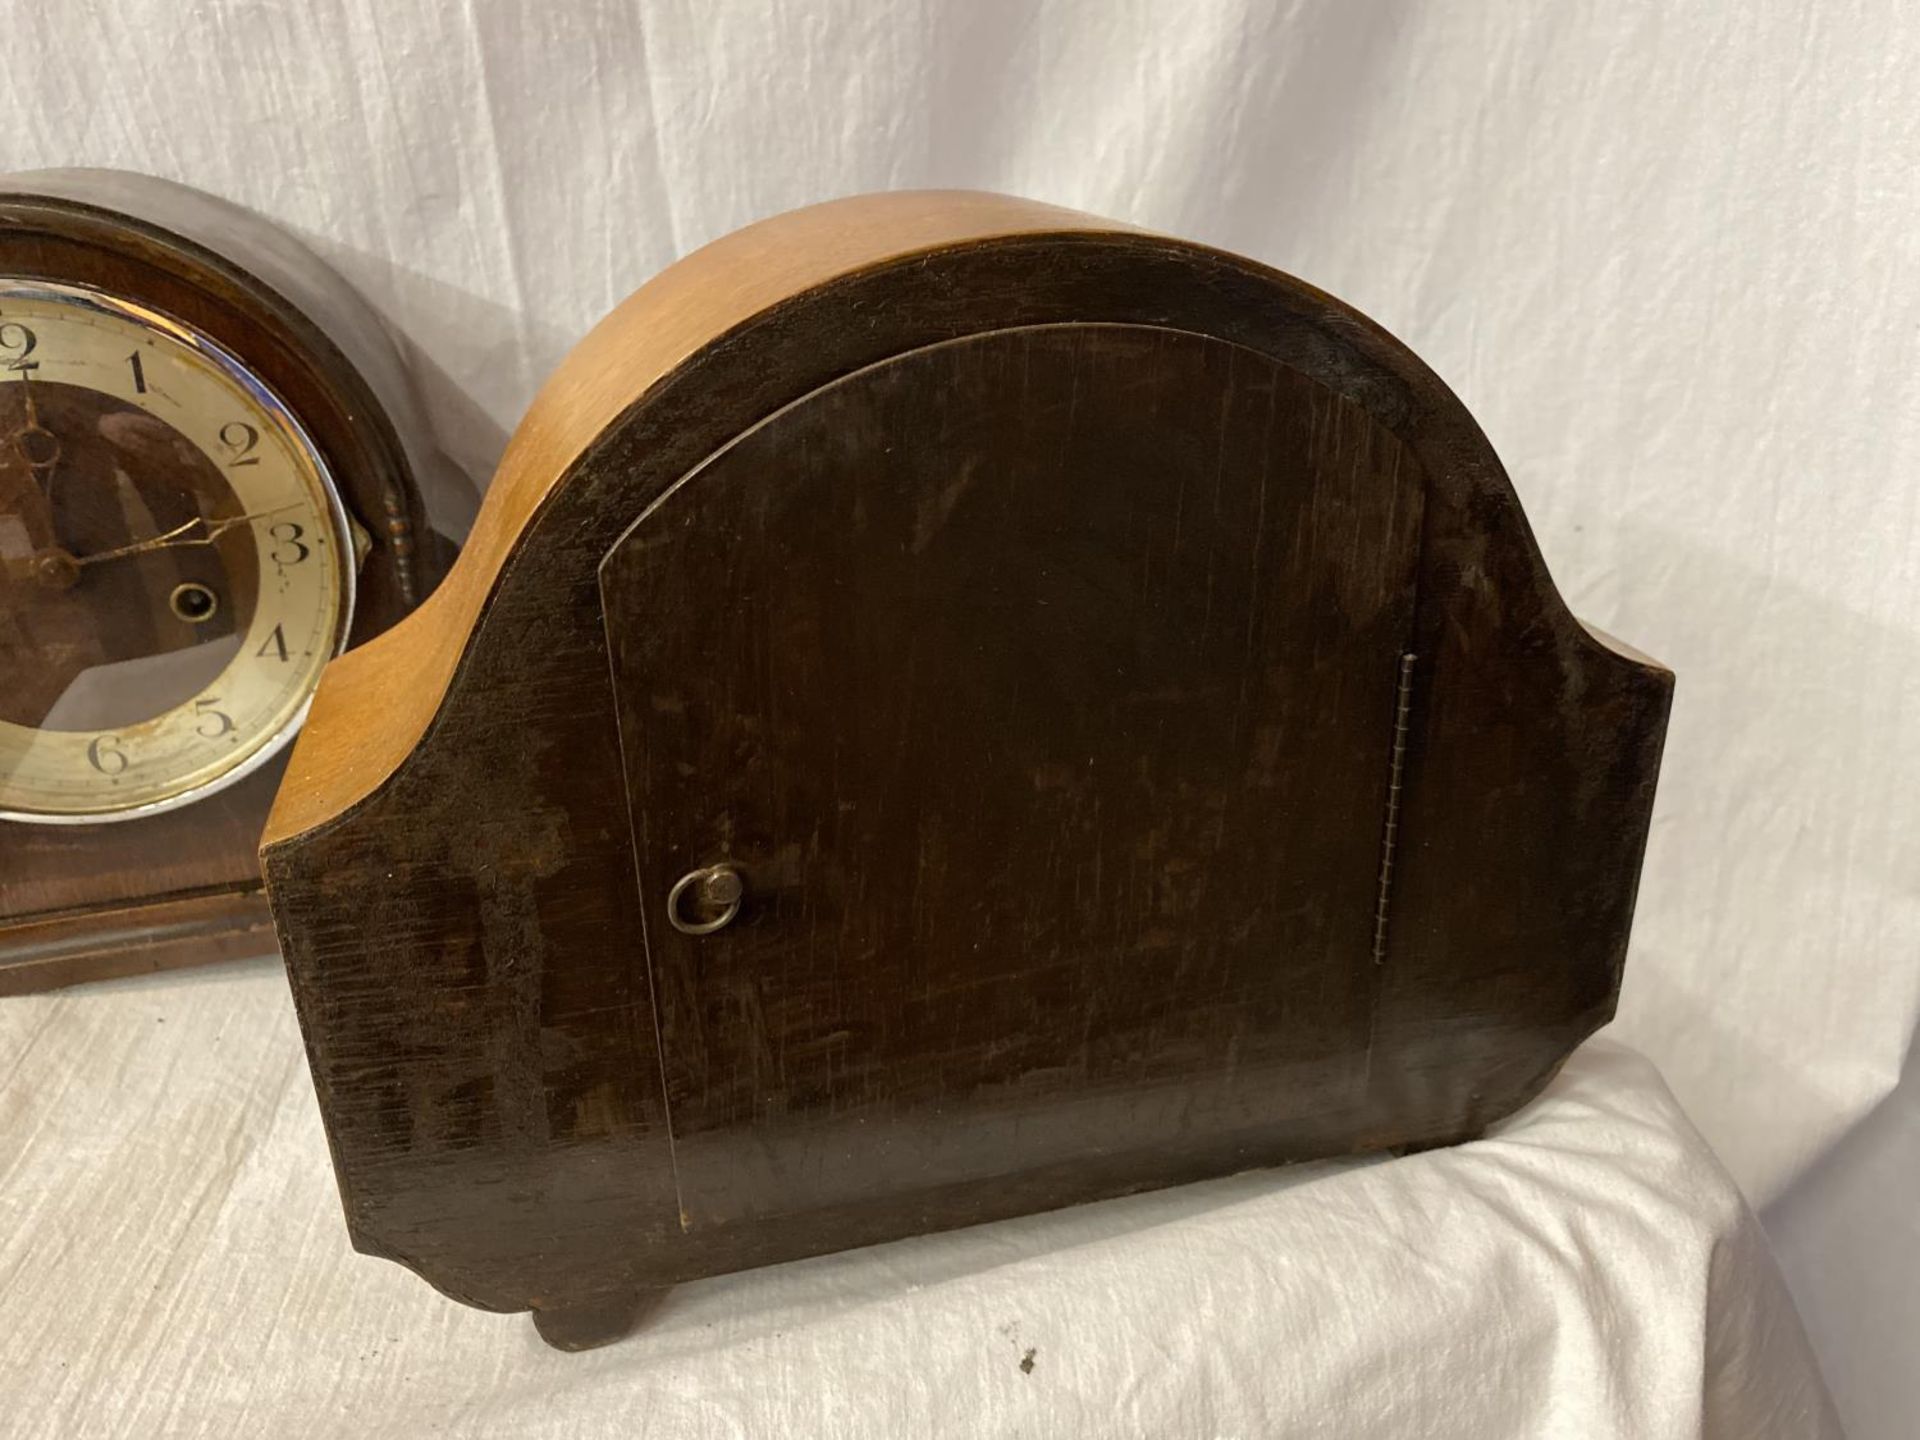 TWO MANTEL CLOCKS, ONE A MAHOGANY NAPOLEON HAT EXAMPLE AND THE OTHER AN ART DECO STYLE - Image 3 of 8